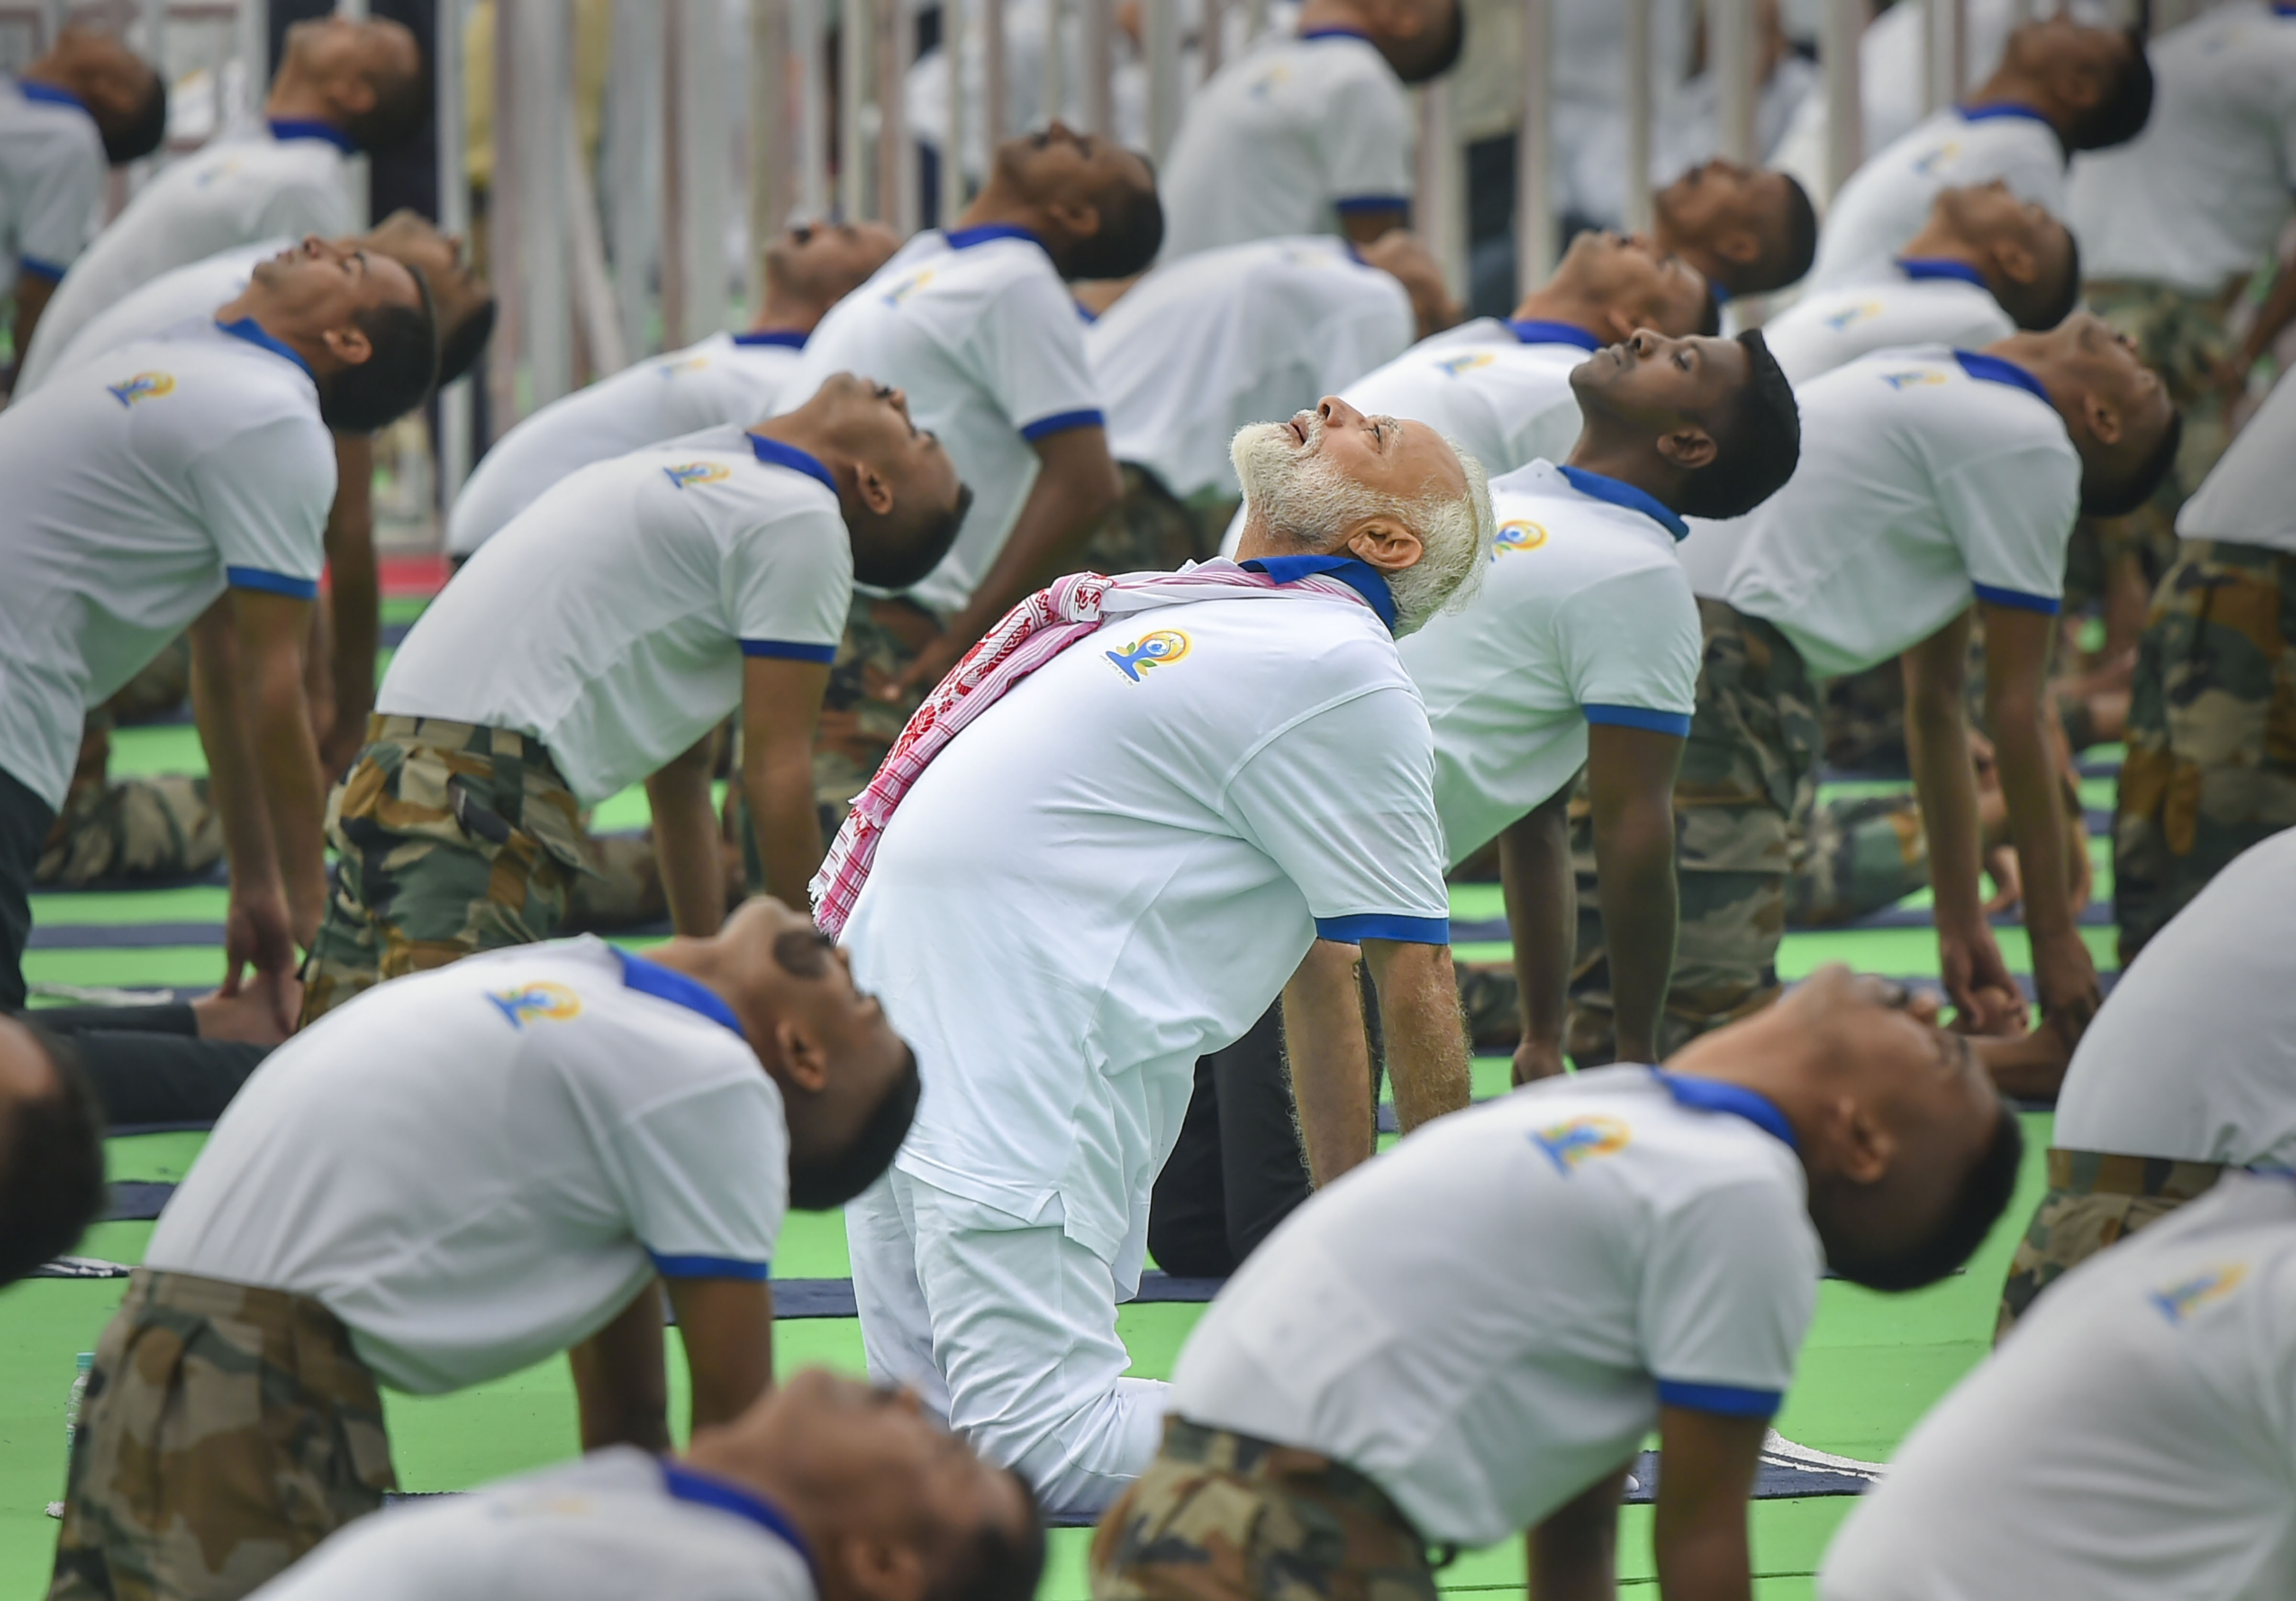 We should take yoga from cities to the villages: Modi on Yoga Day